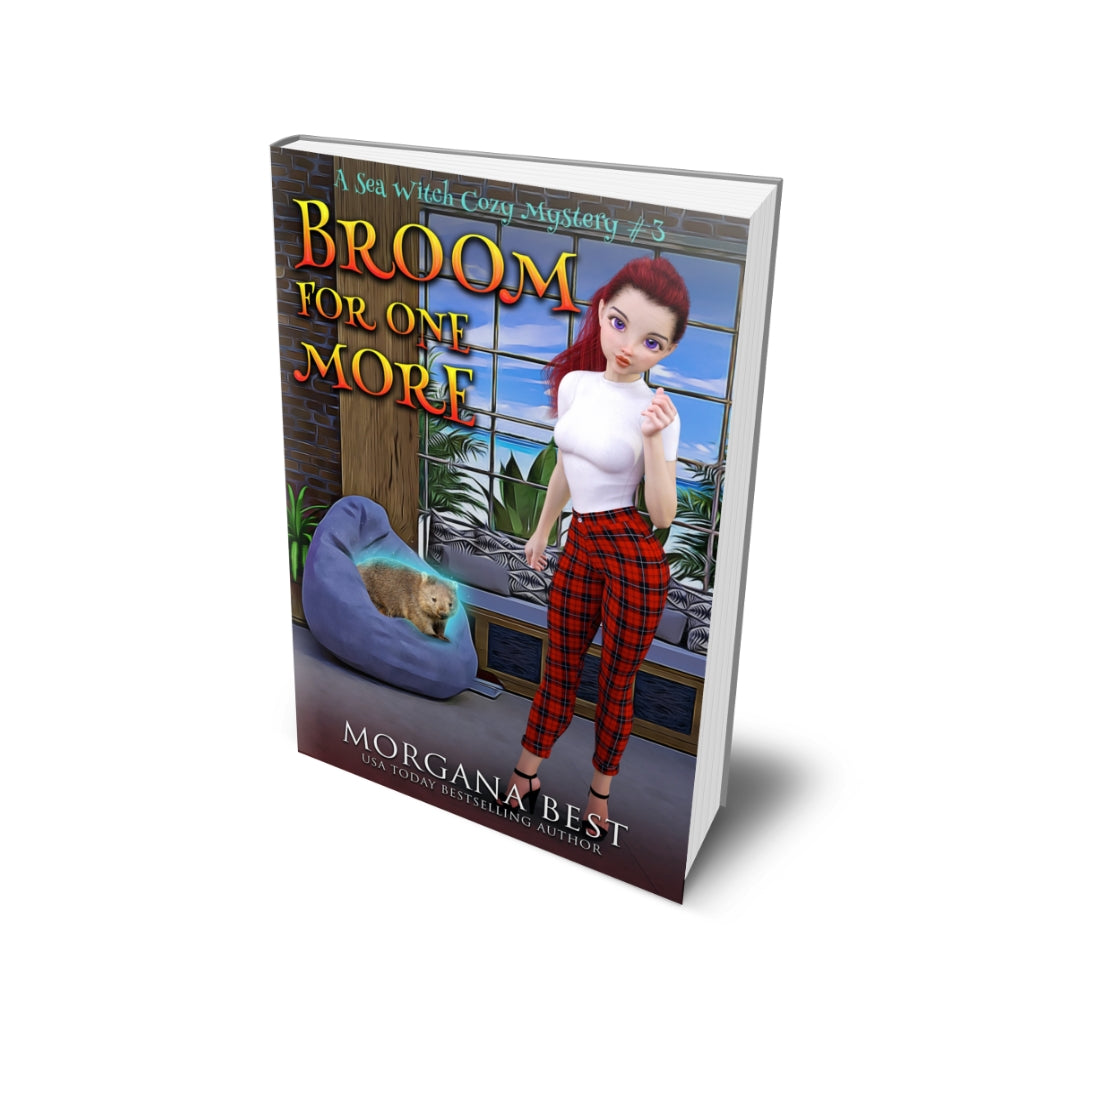 Broom For One More PAPERBACK cozy mystery